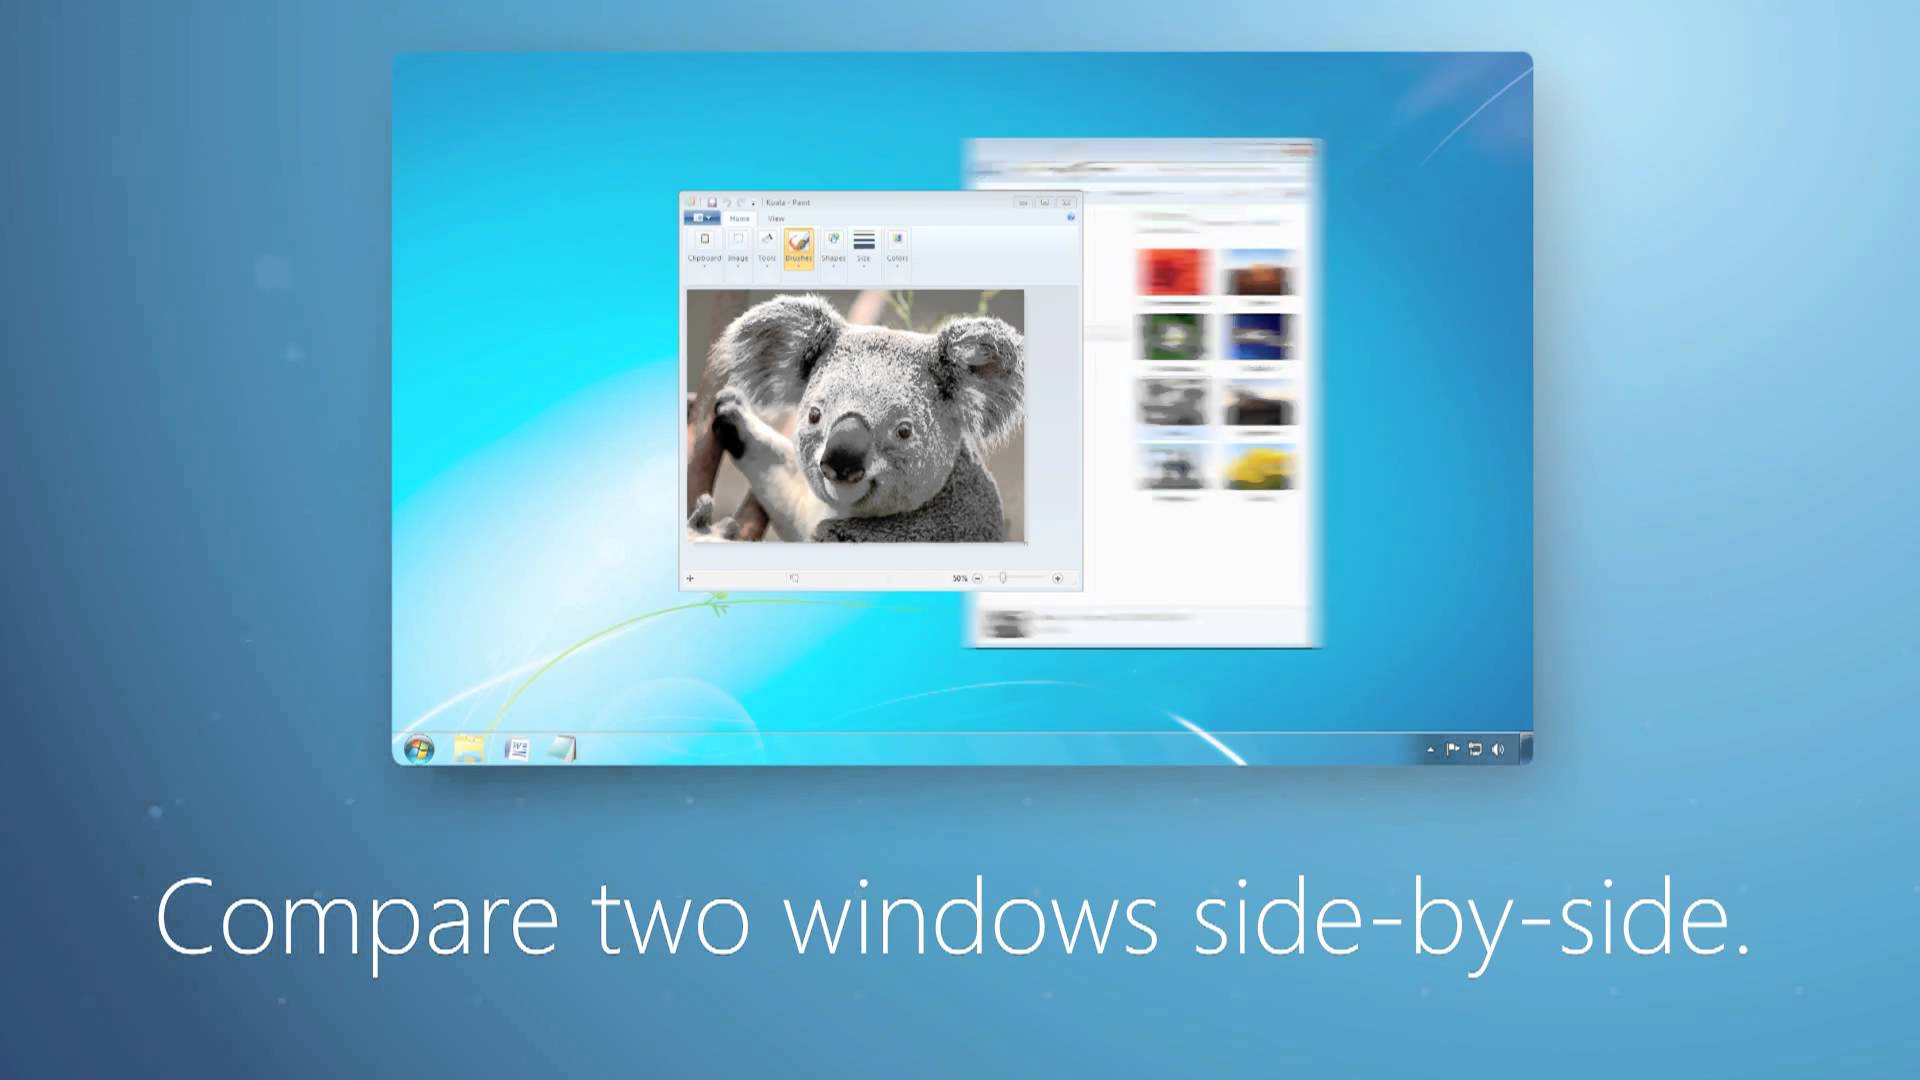 Windows 7 your PC Simplified. Your PC Simplified.